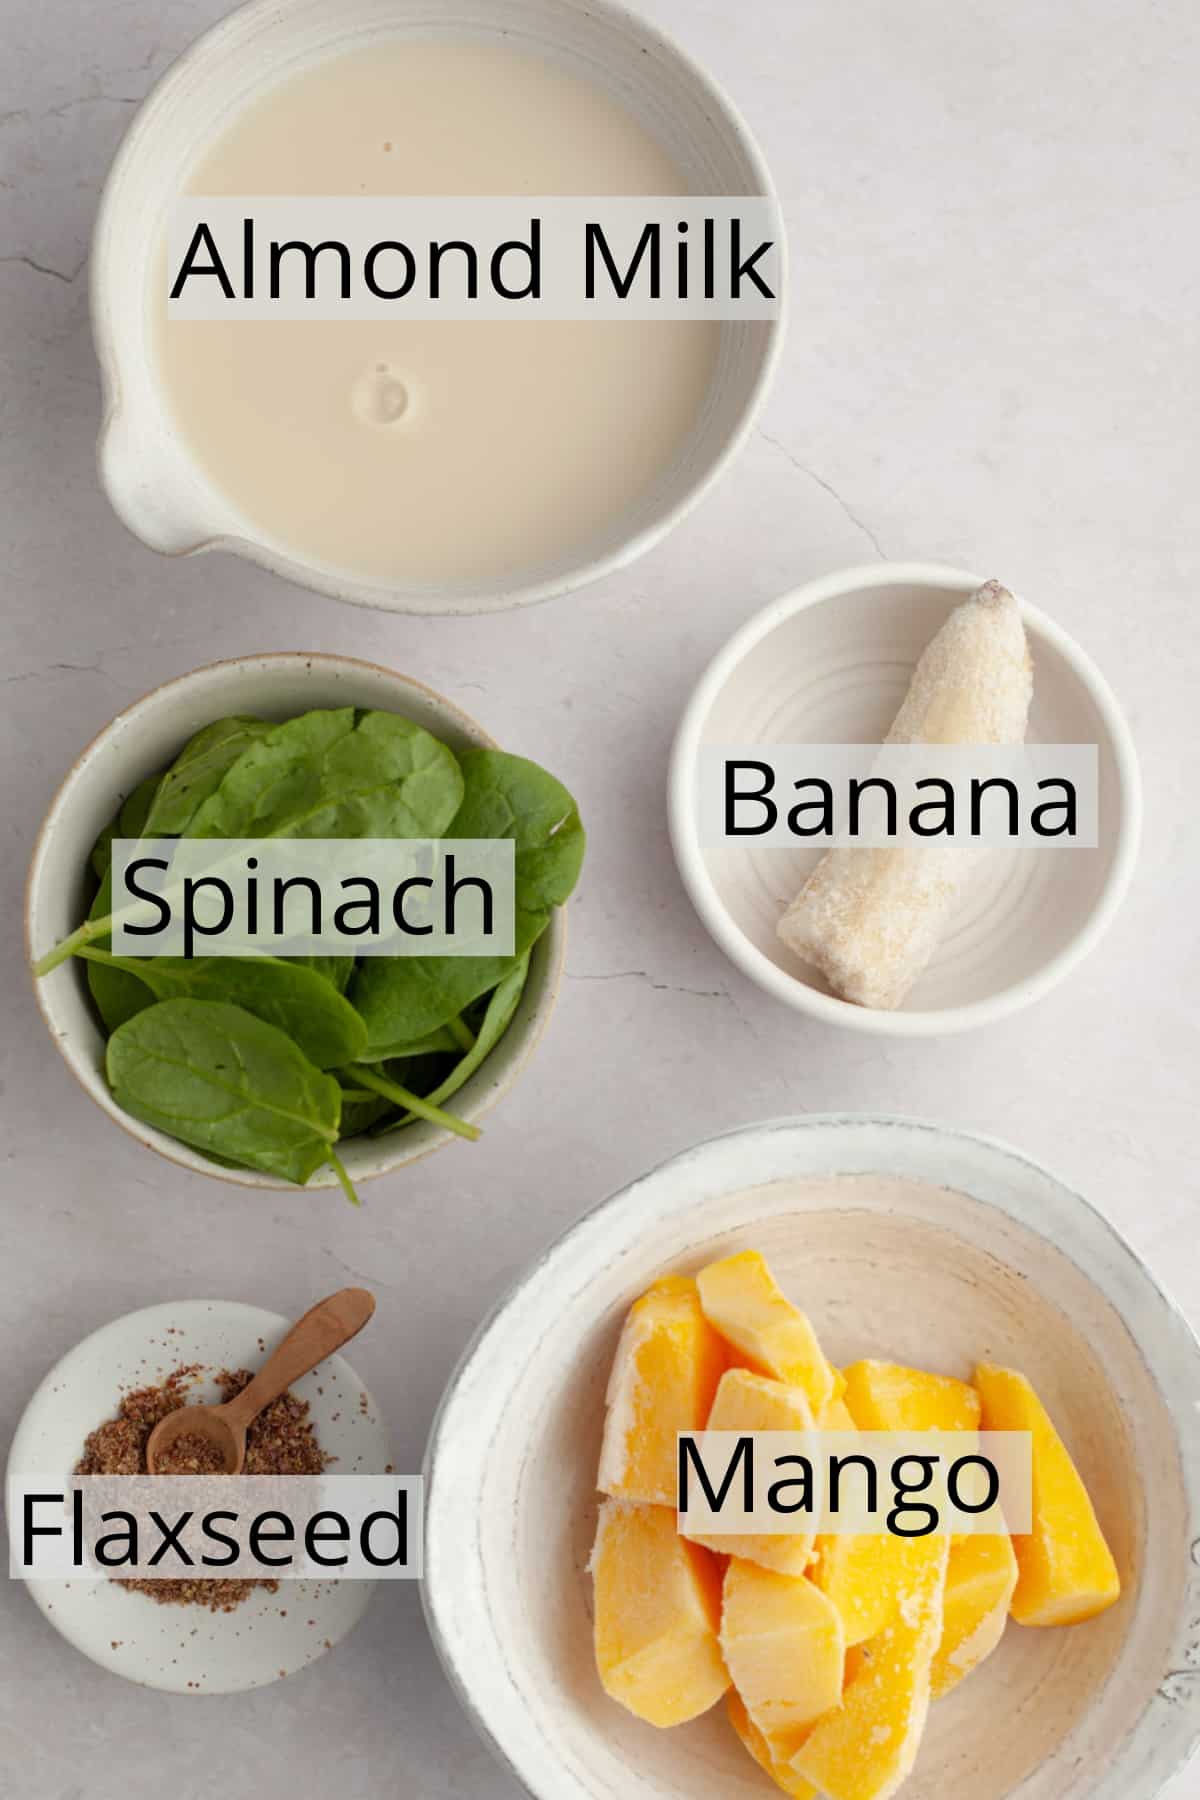 All the ingredients needed to make spinach mango smoothies, weighed out into small bowls.